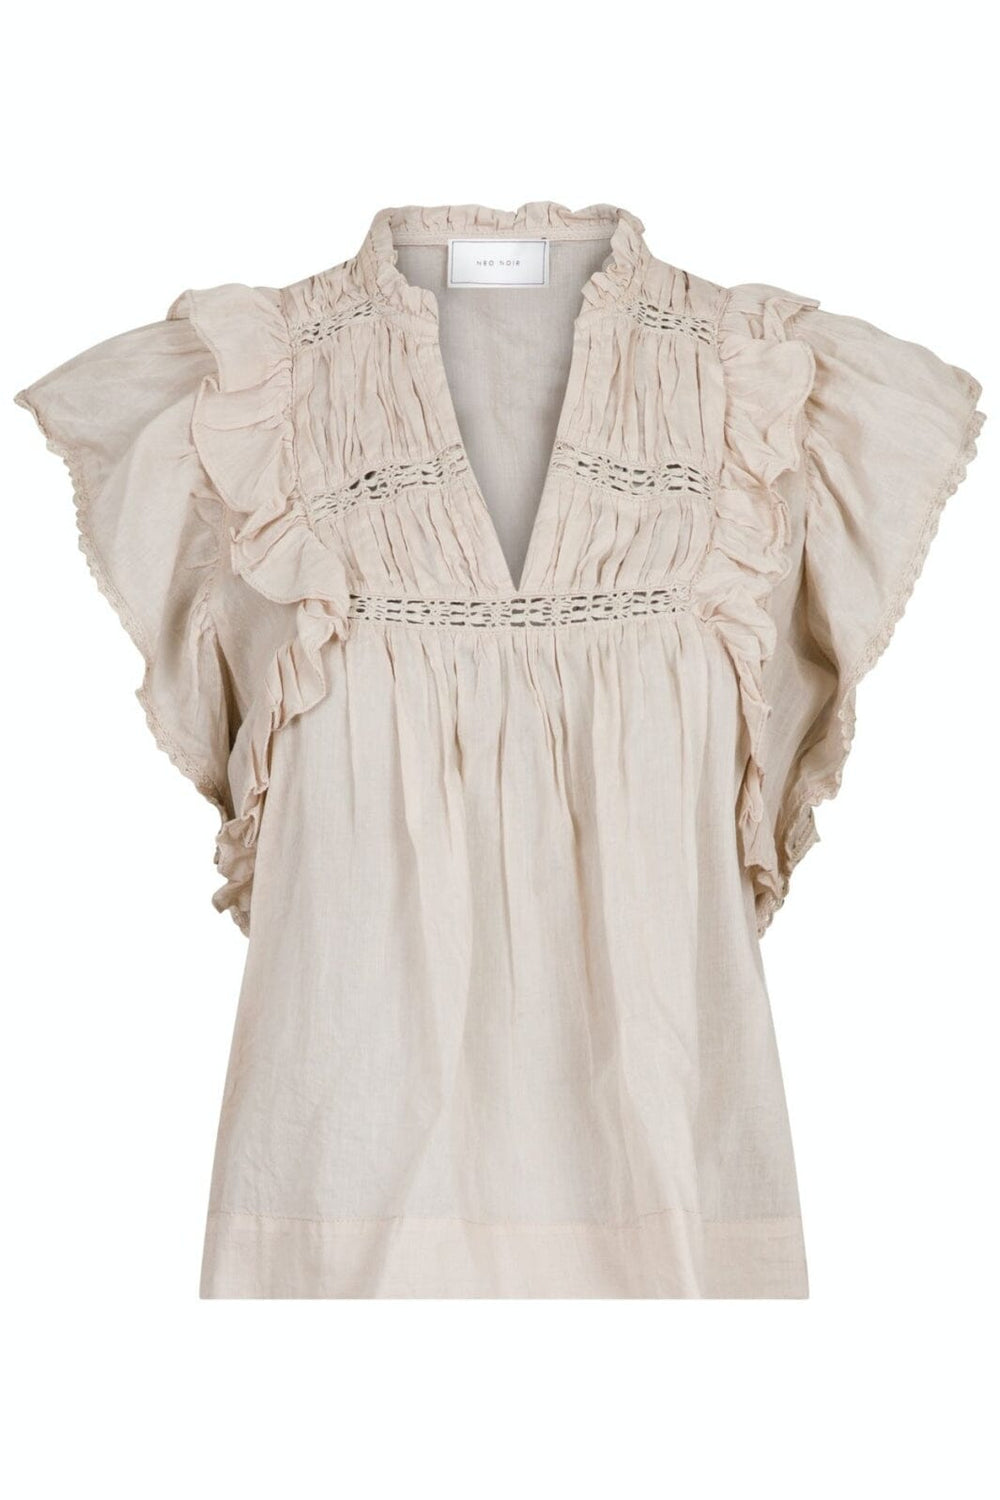 Neo Noir - Jayla S Voile Top - Sand Toppe 